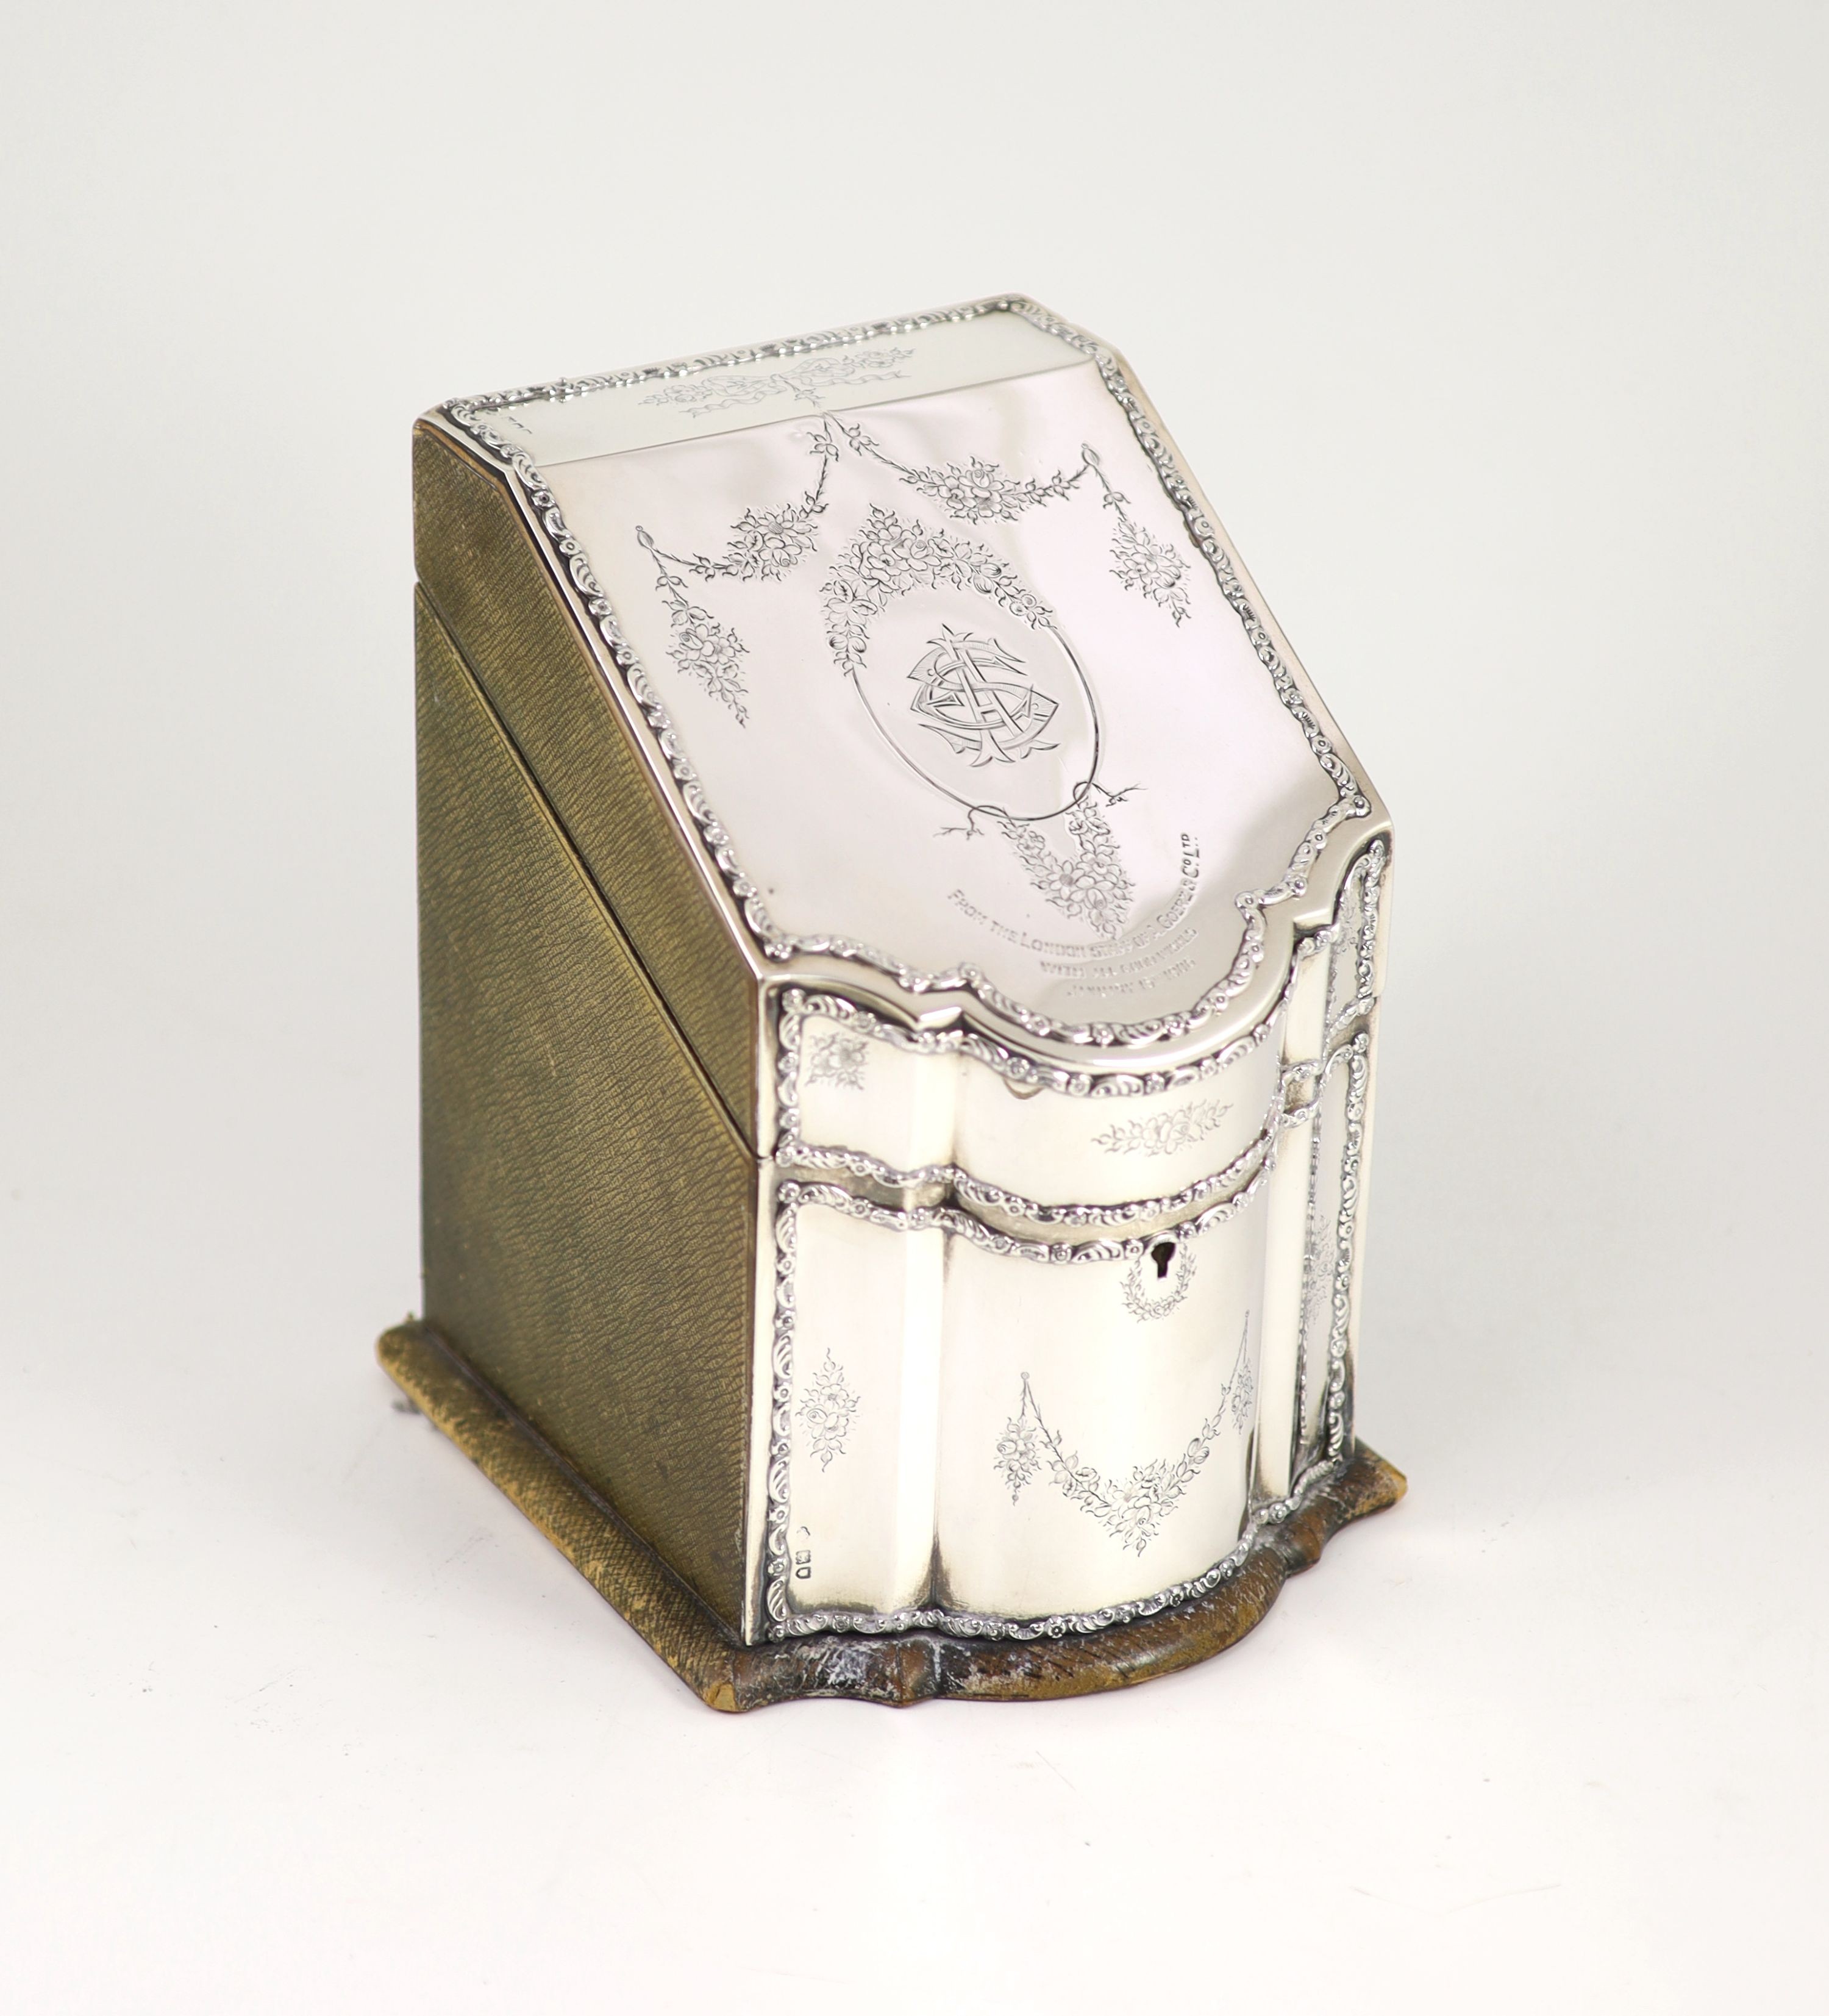 An Edwardian silver mounted leather three piece desk set, comprising a stationary box in the form of a knife box, paperweight and blotter